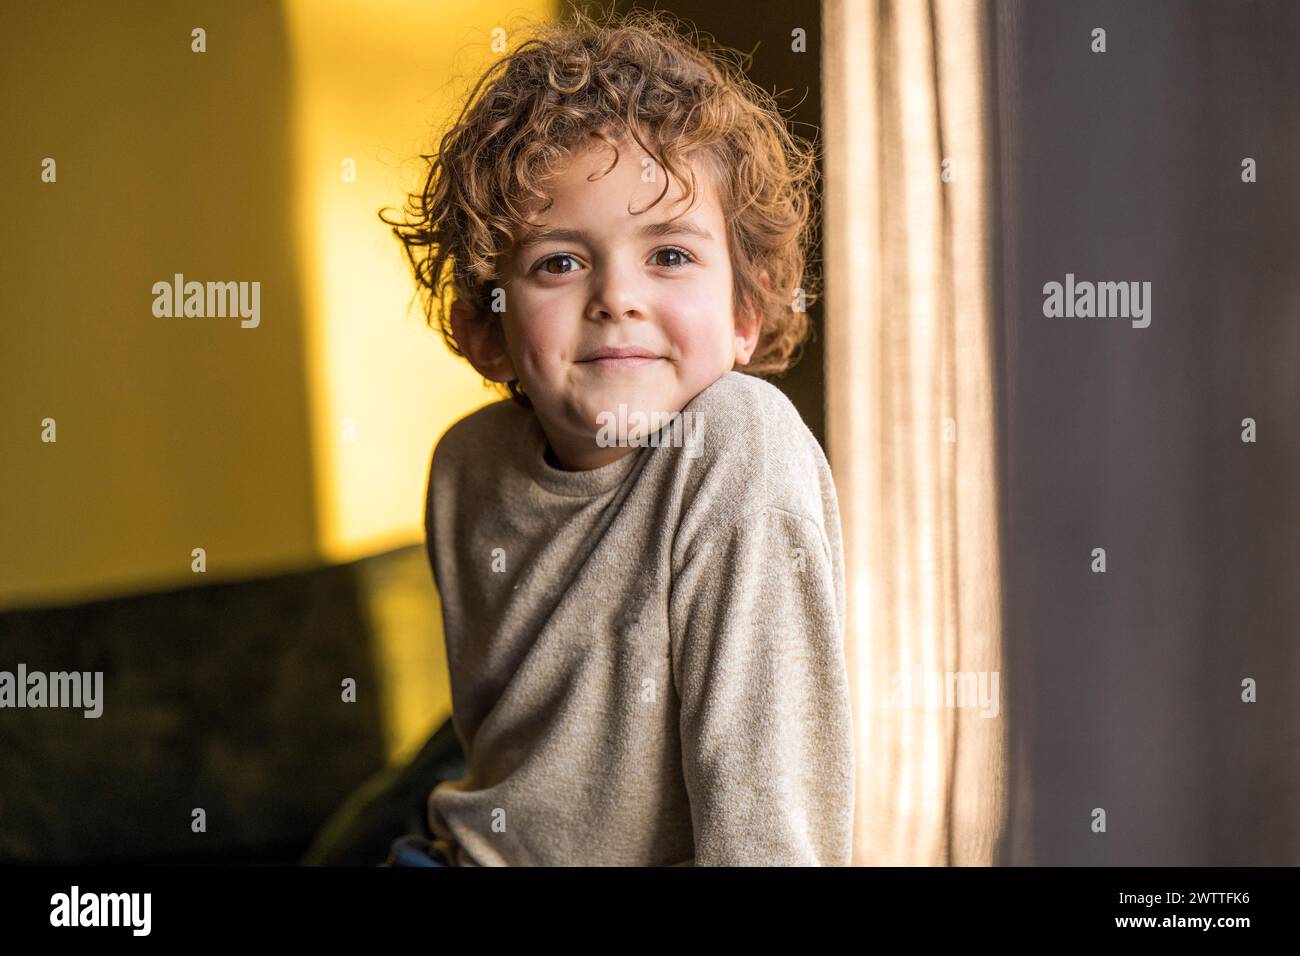 Young child with a joyful smile peeking from behind the curtains. Stock Photo